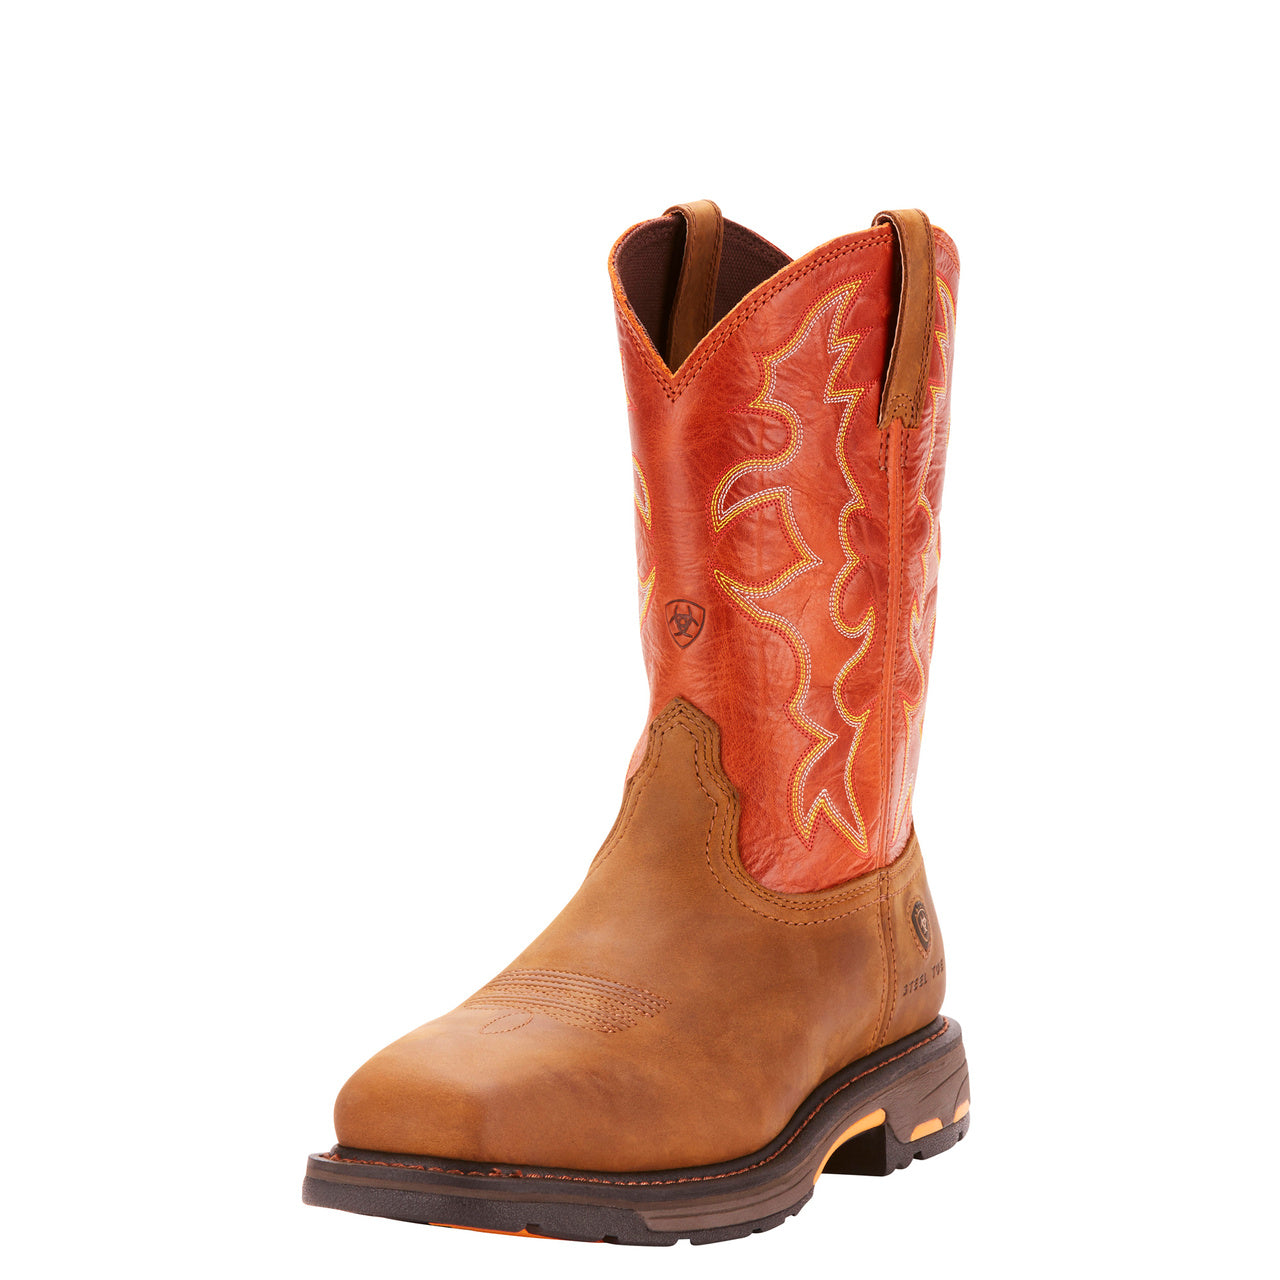 Ariat Workhog Wide Square Toe Boot 8 D